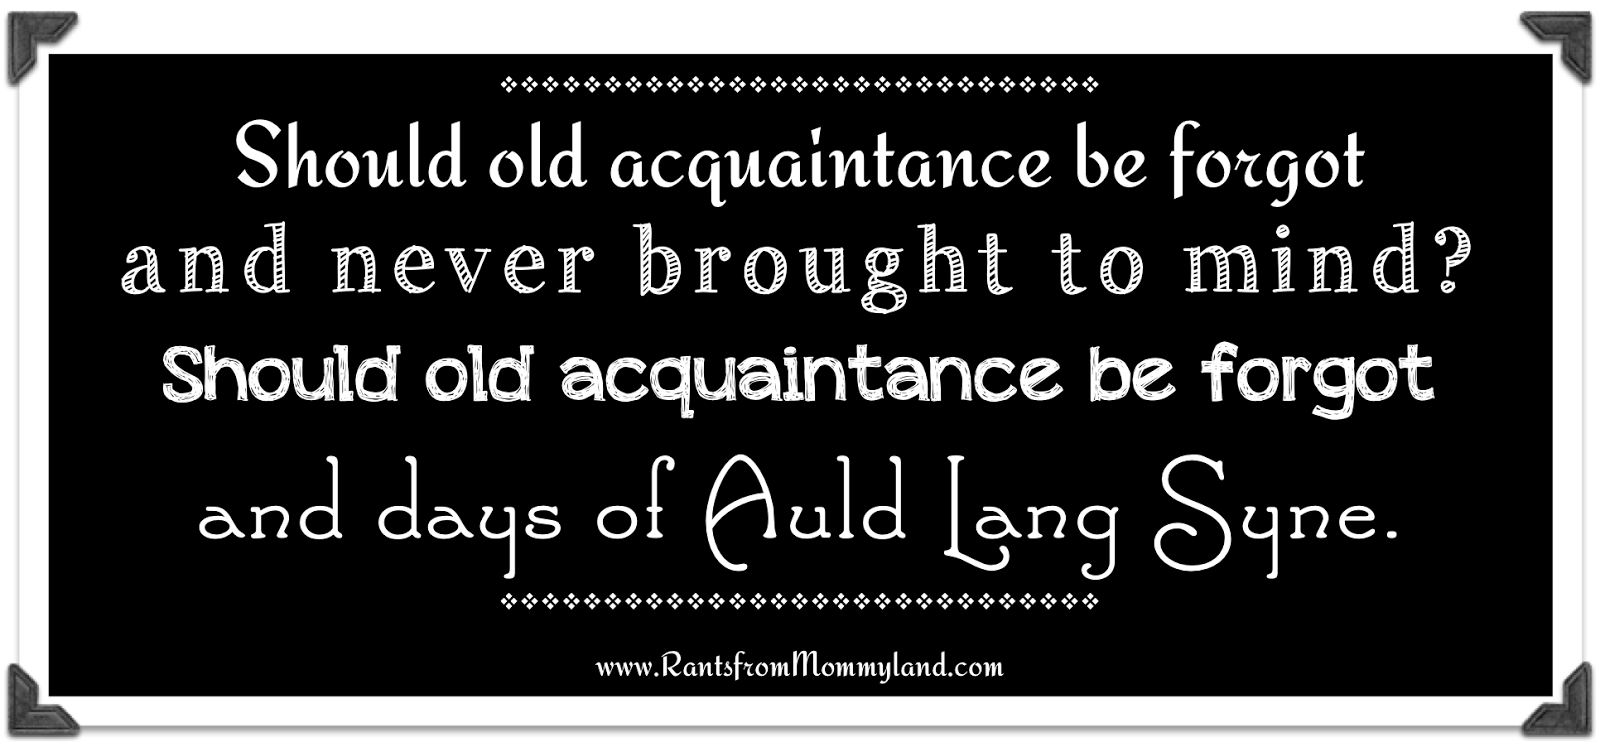 RANTS FROM MOMMYLAND: For Auld Lang Syne